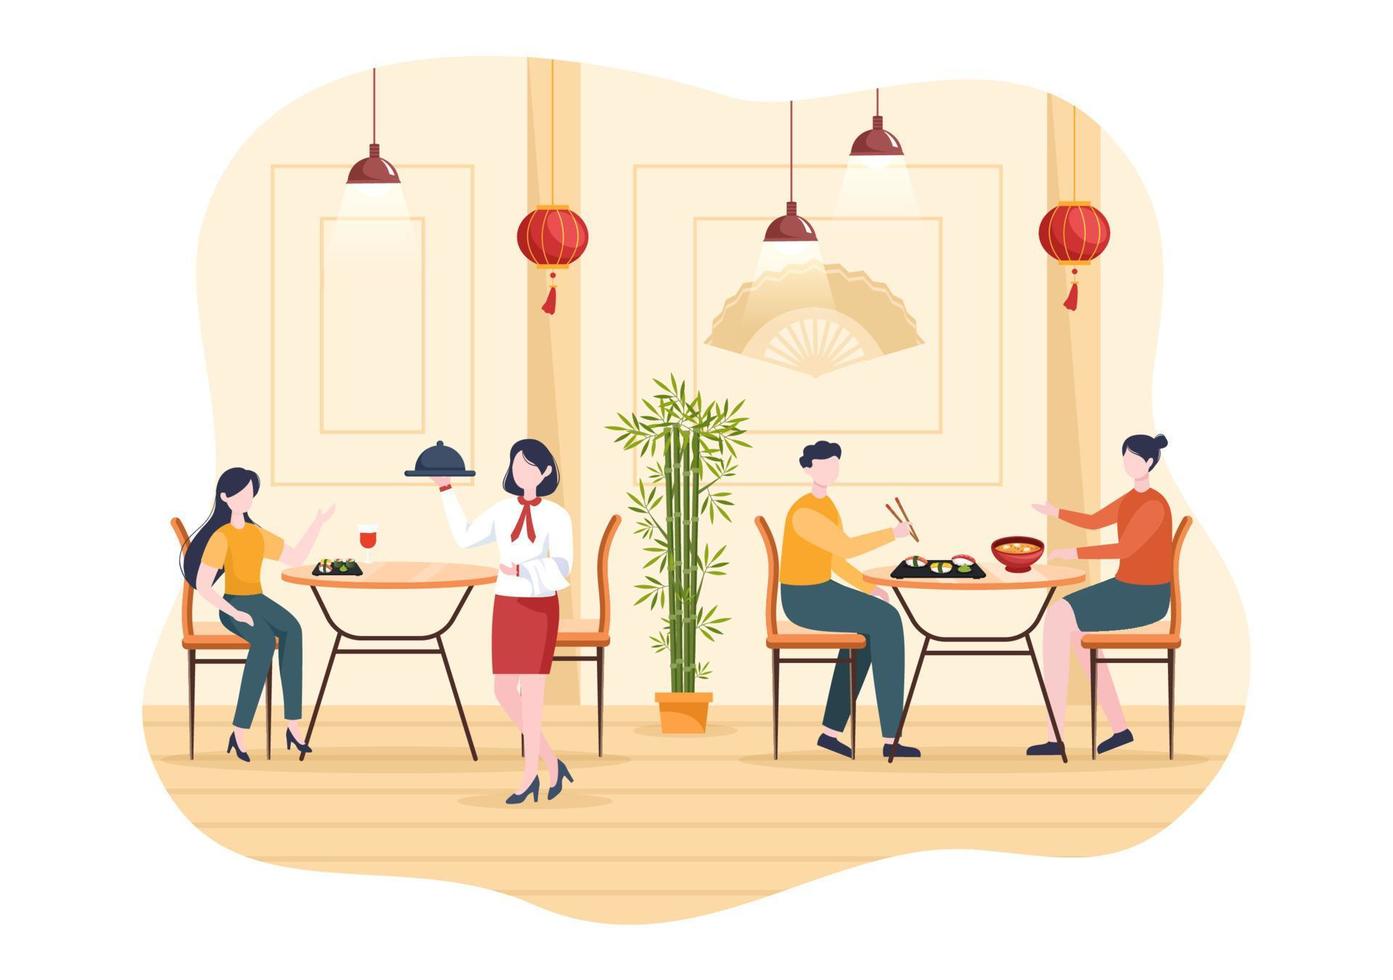 People Eating Japanese Food in the Restaurant with Various Delicious Dishes such as Sushi on a Plate, Sashimi roll and Other in Flat Style Cartoon Illustration vector